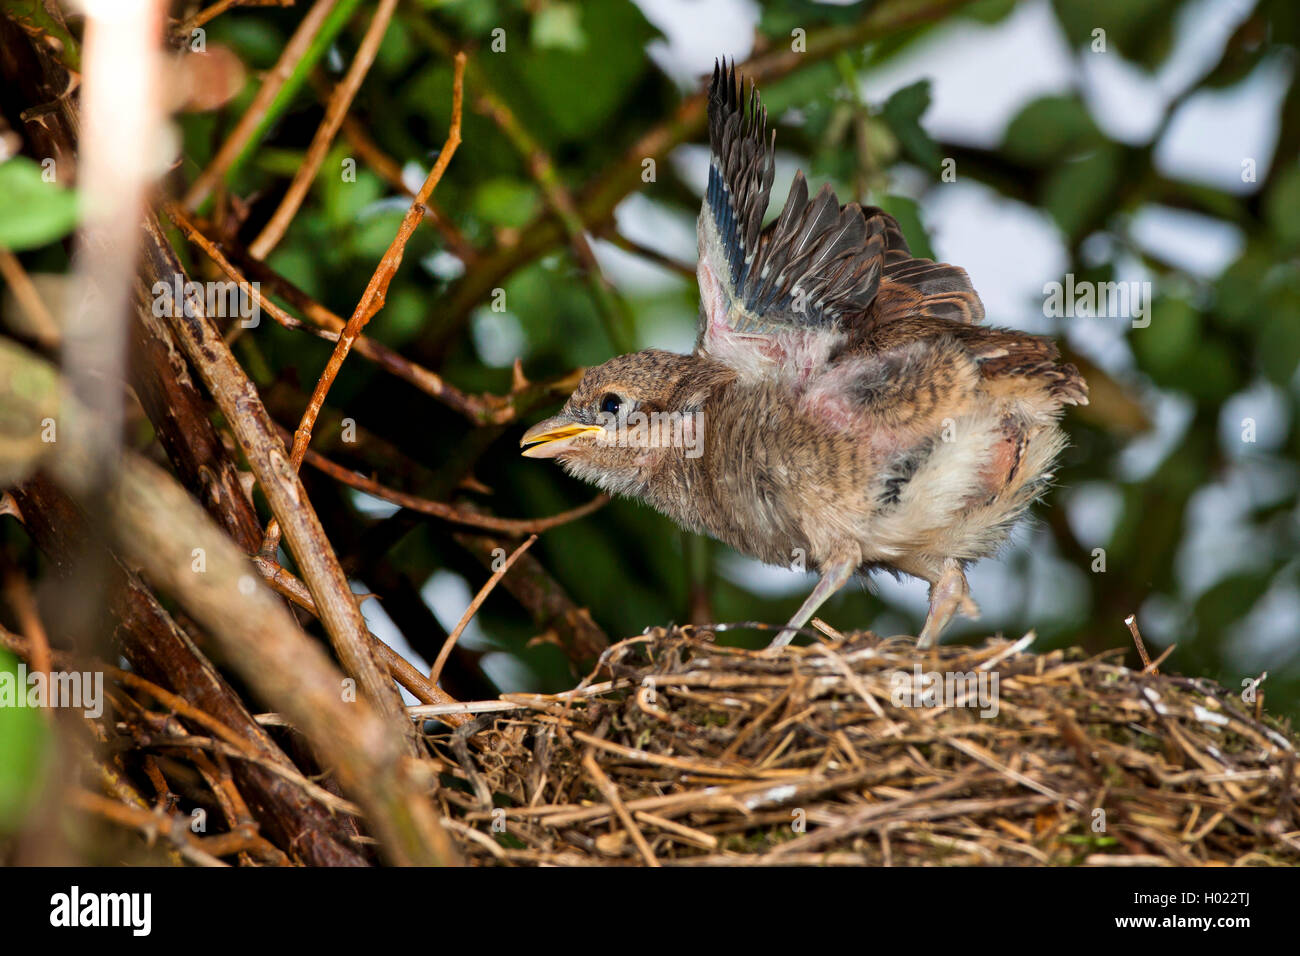 red-backed shrike (Lanius collurio), nestling in the nest flapping wings, side view, Germany Stock Photo